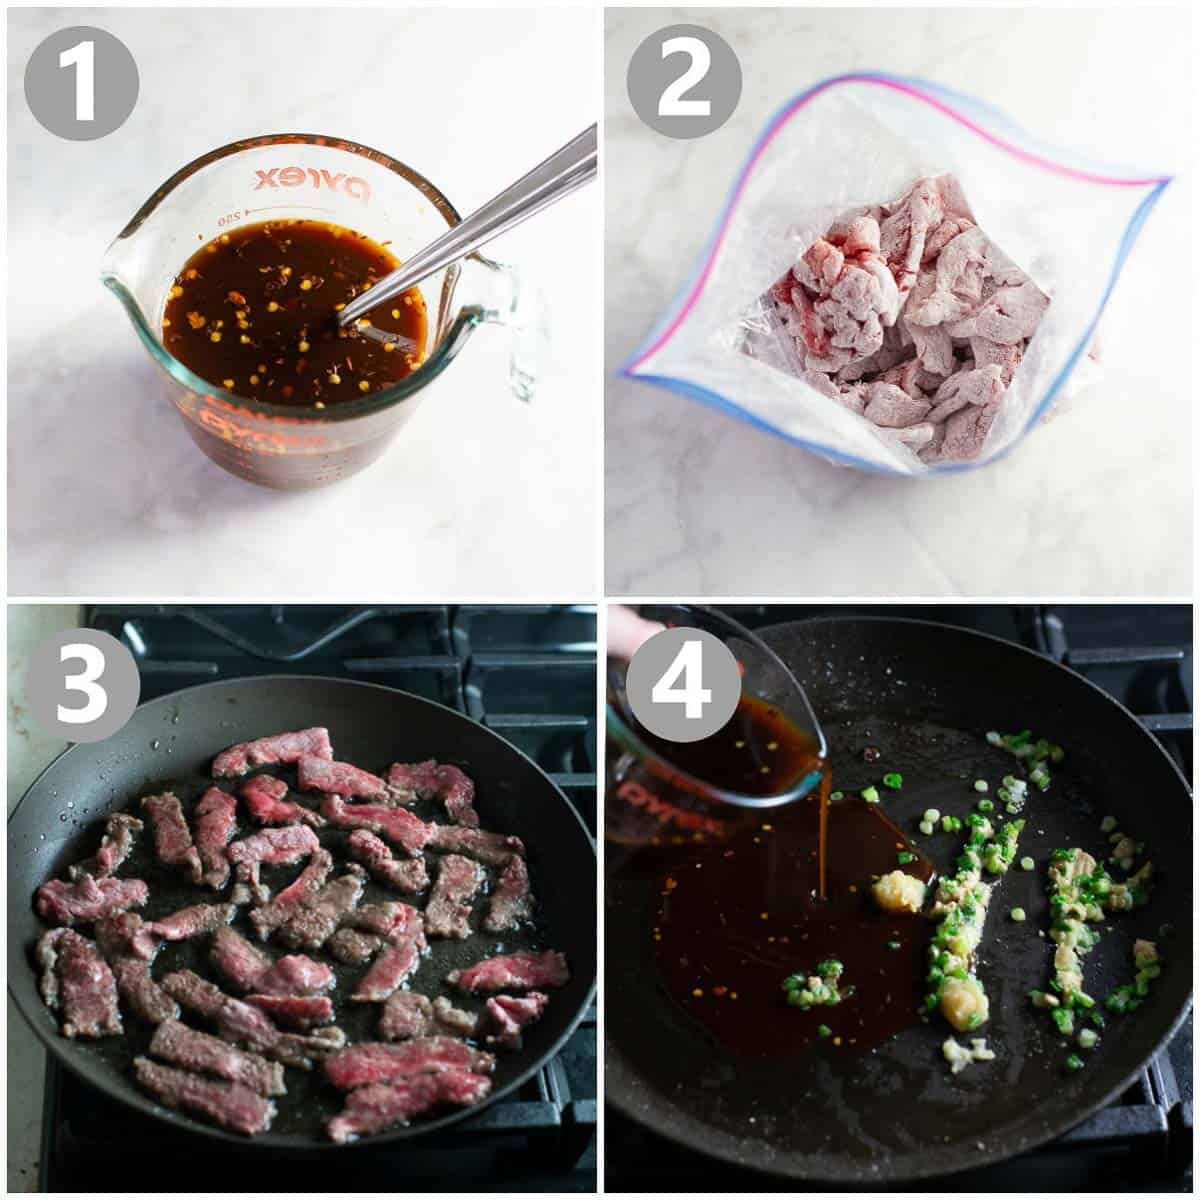 step-by-step photos show how to make beef teriyaki, including coating and cooking the beef